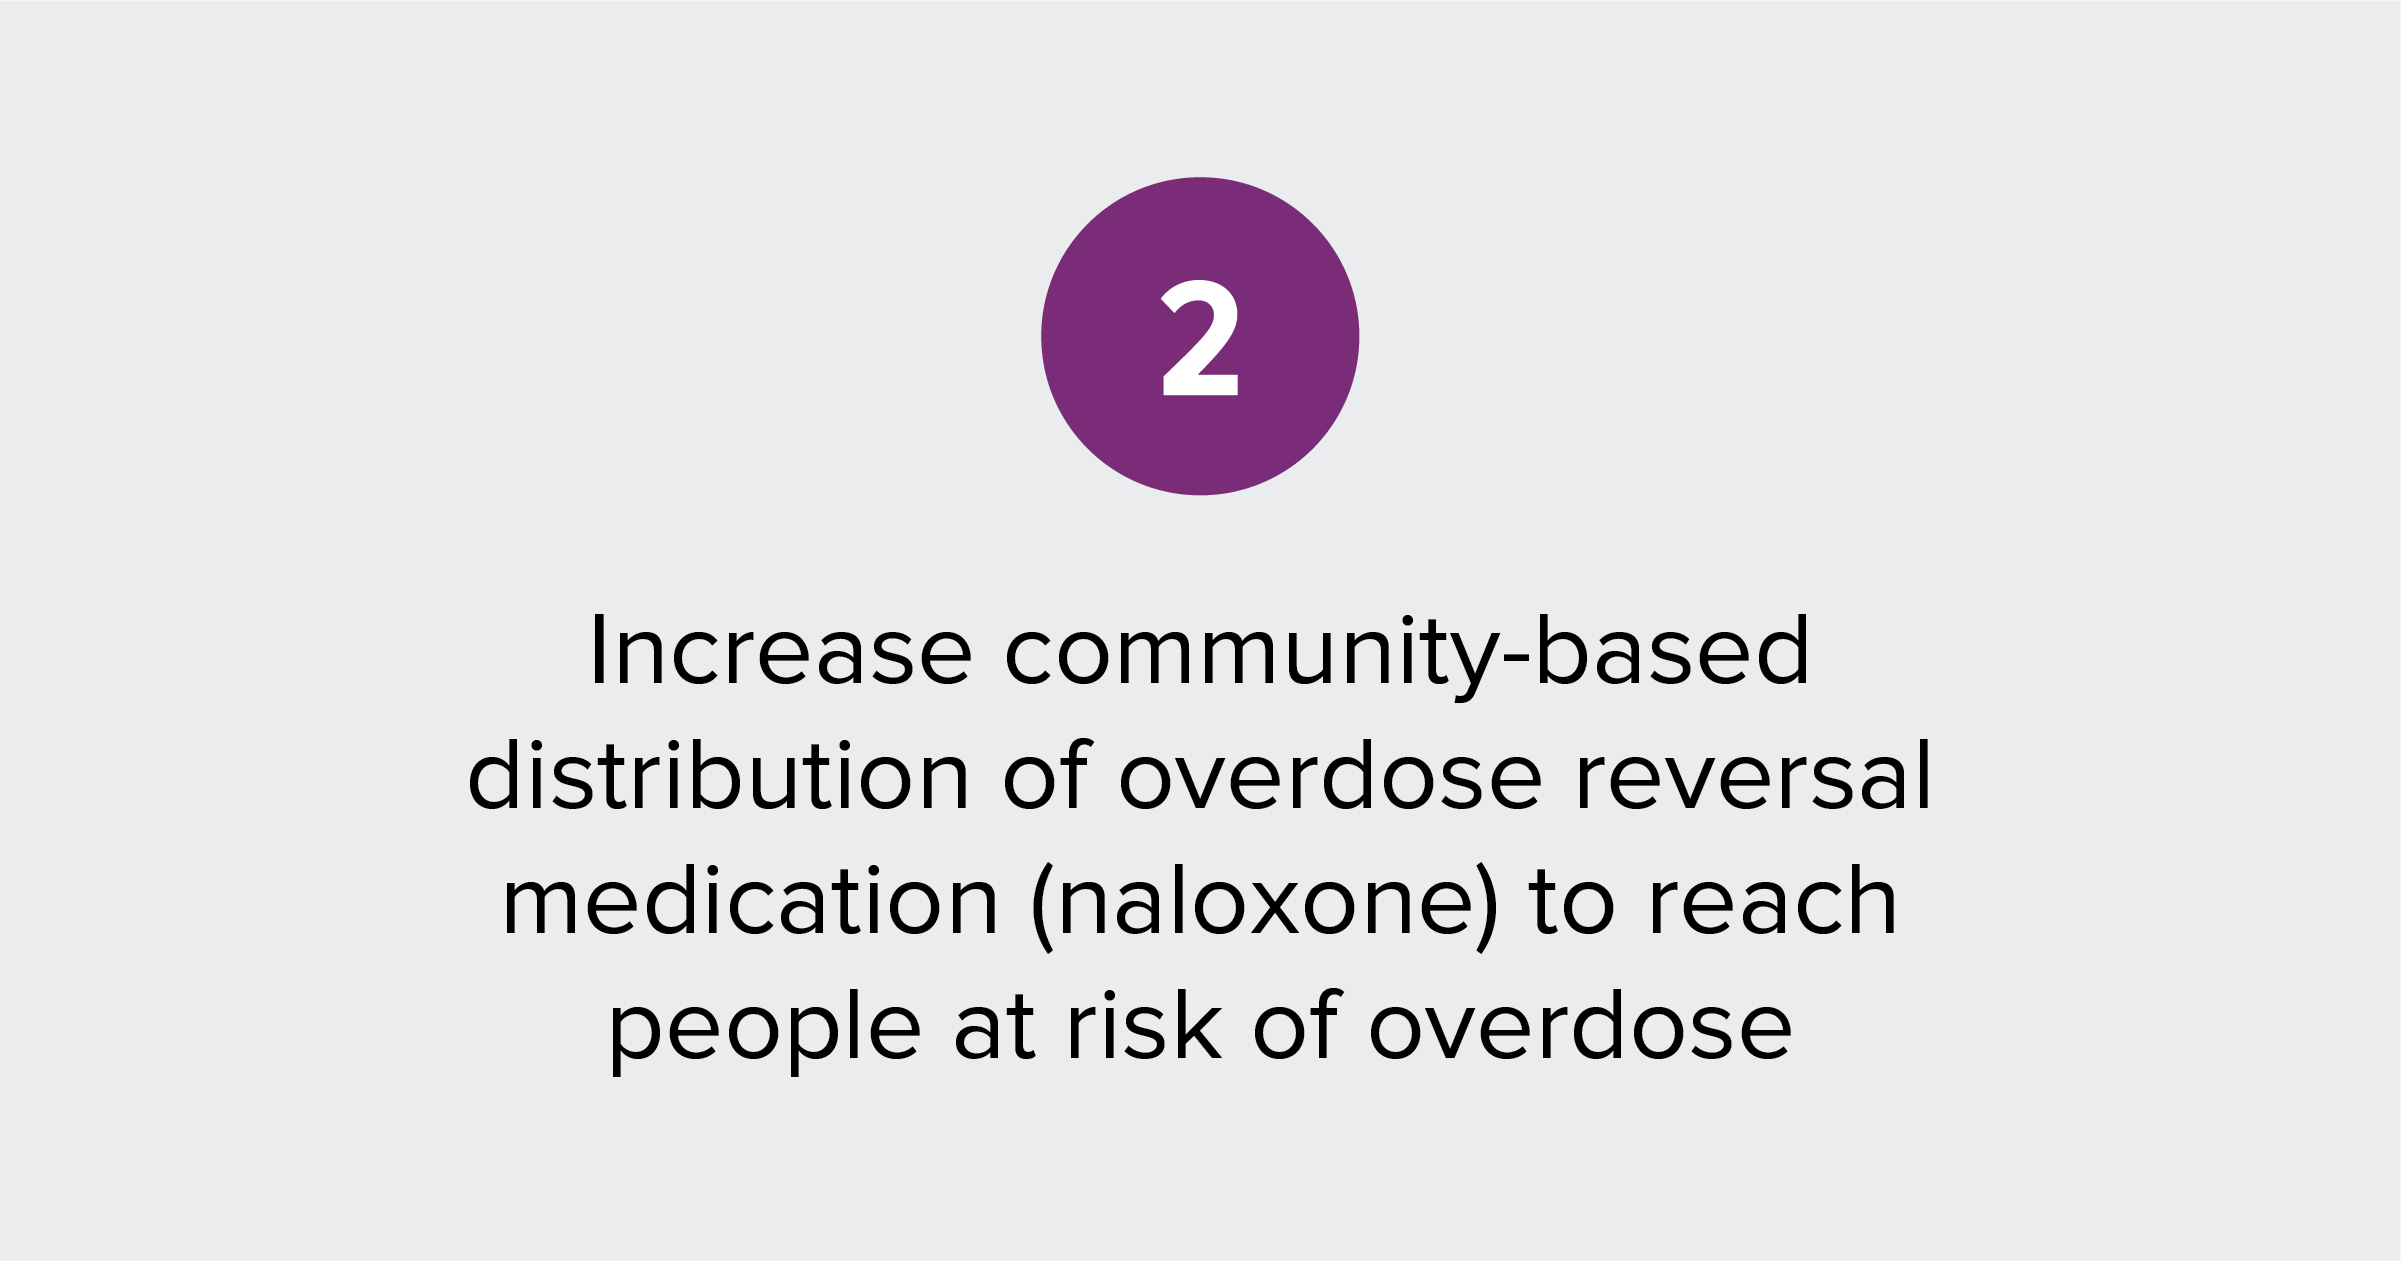 Text of report recommendation 2: Increase community-based distribution of overdose reversal medication to reach people at risk of overdose